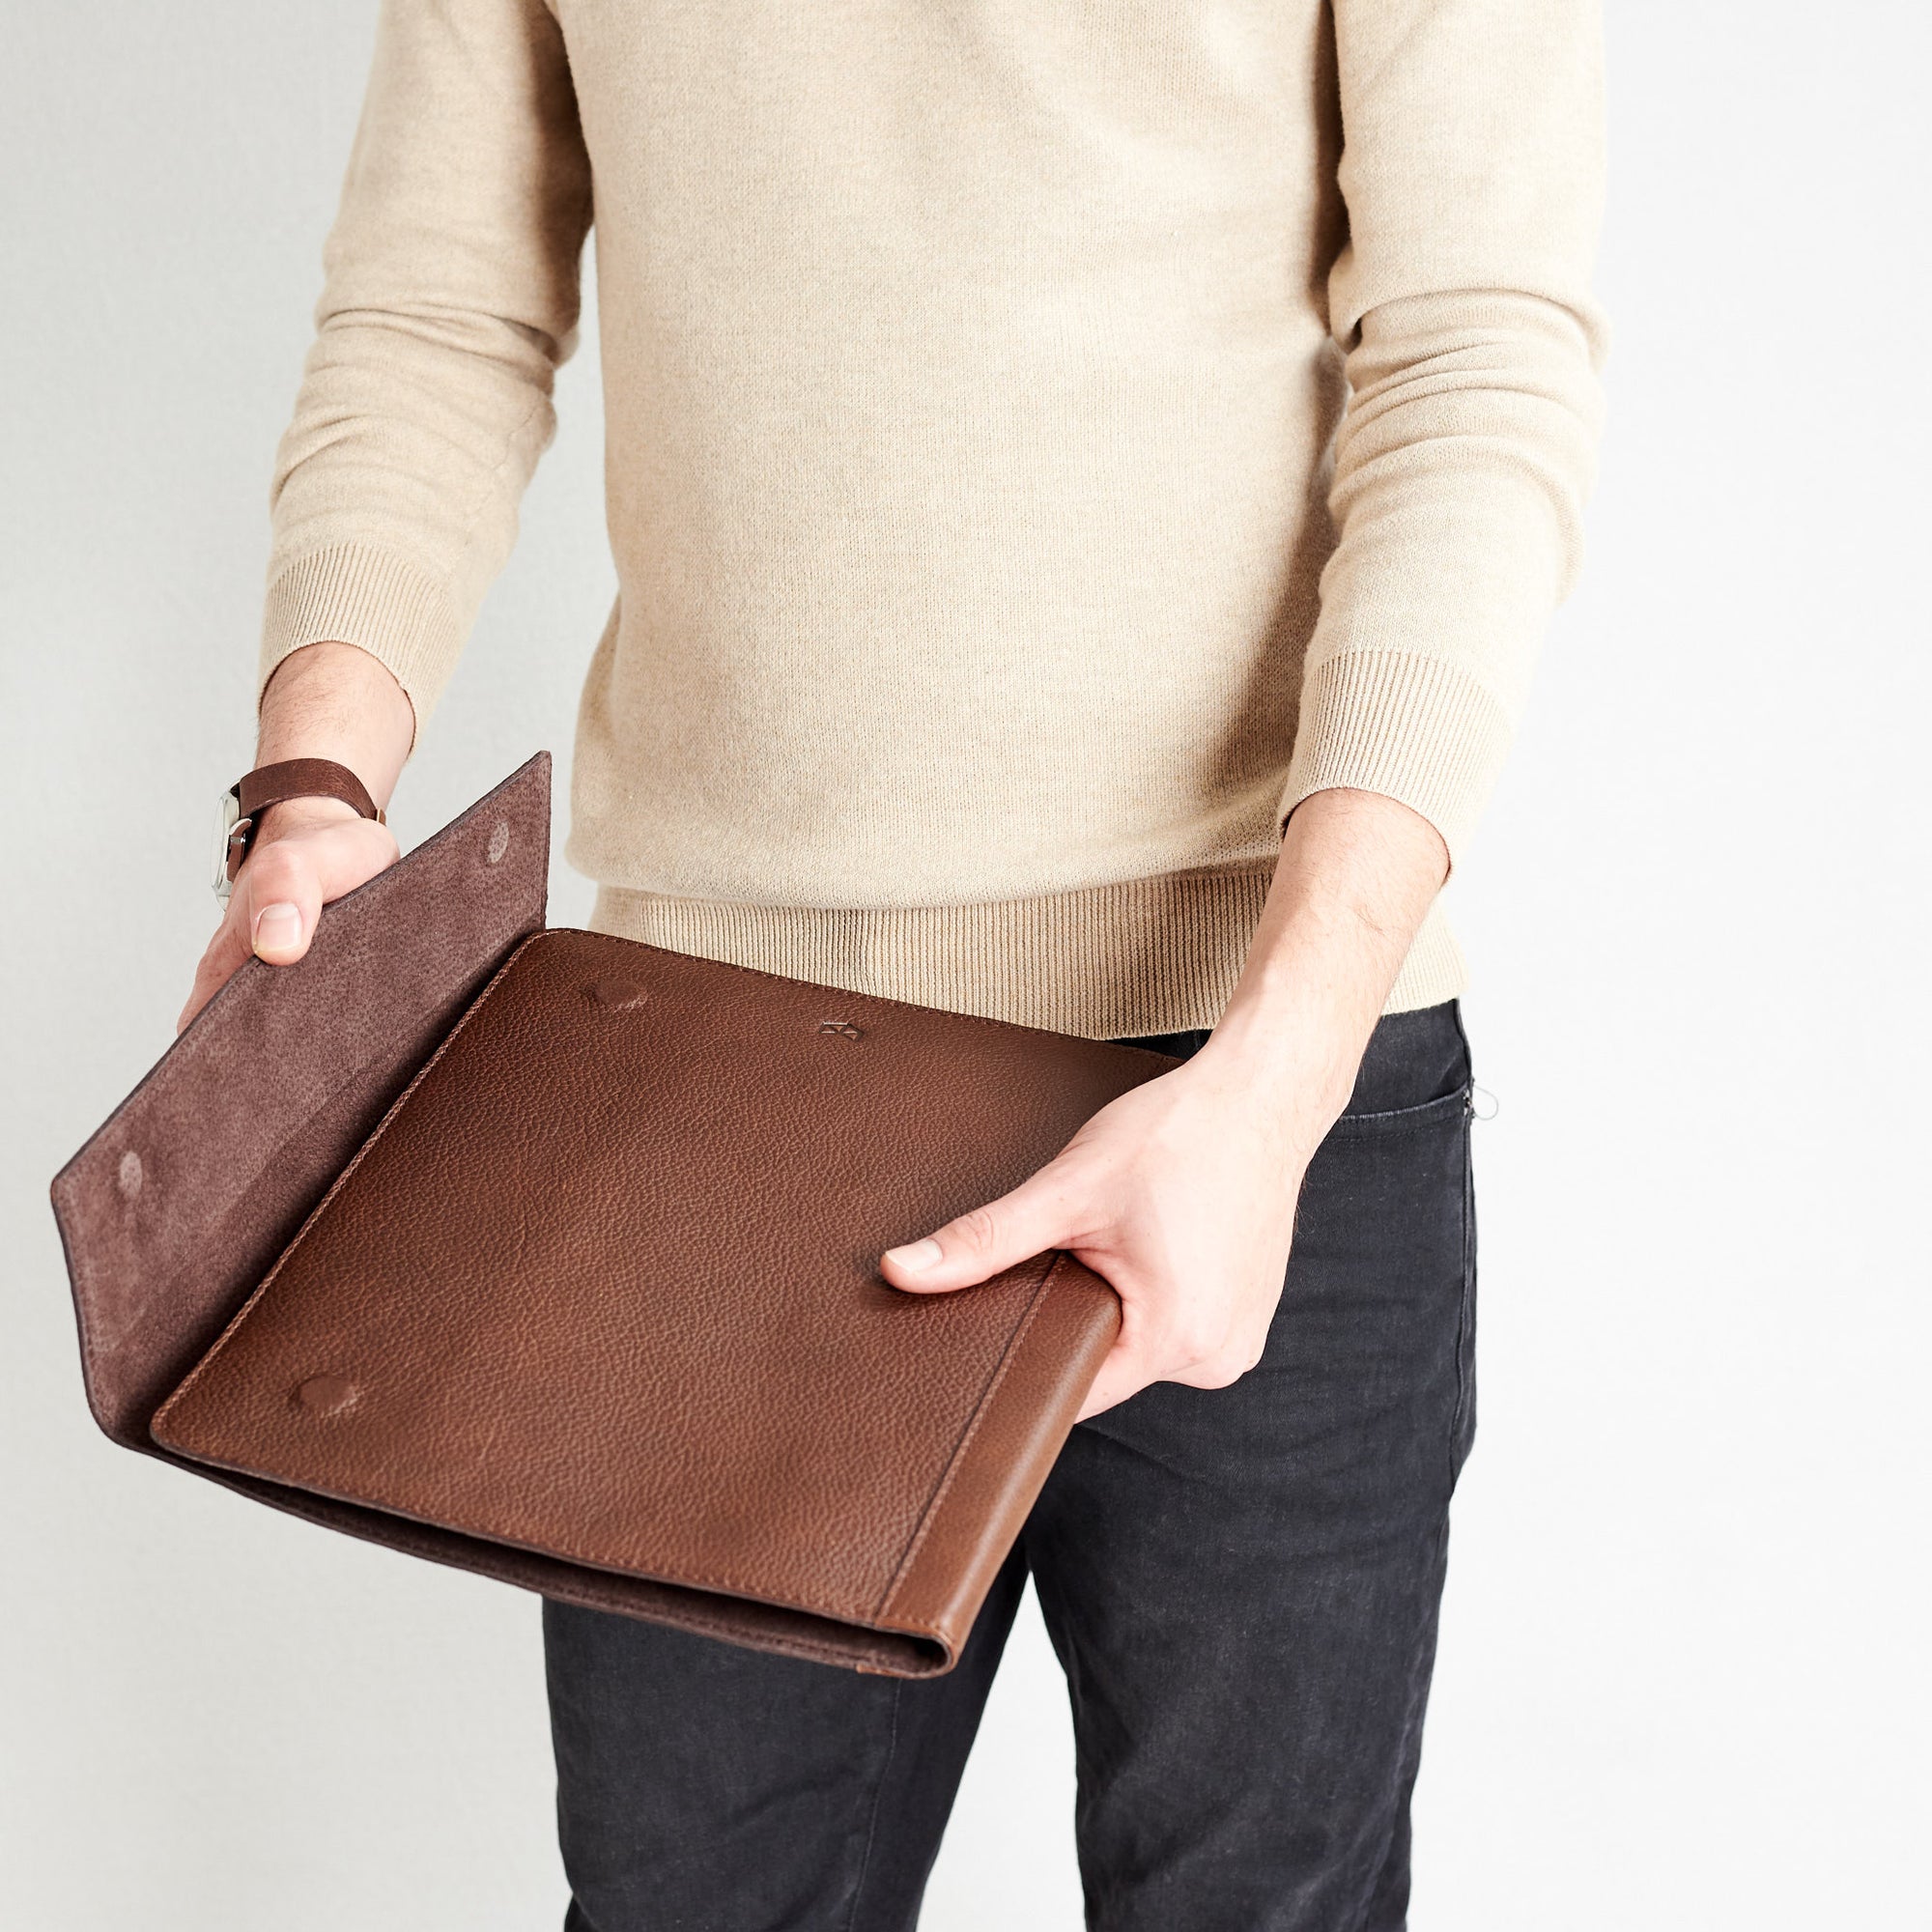 Style pockets detail. Brown Laptop Tablet Portfolio. Business Document Organizer for Men by Capra Leather